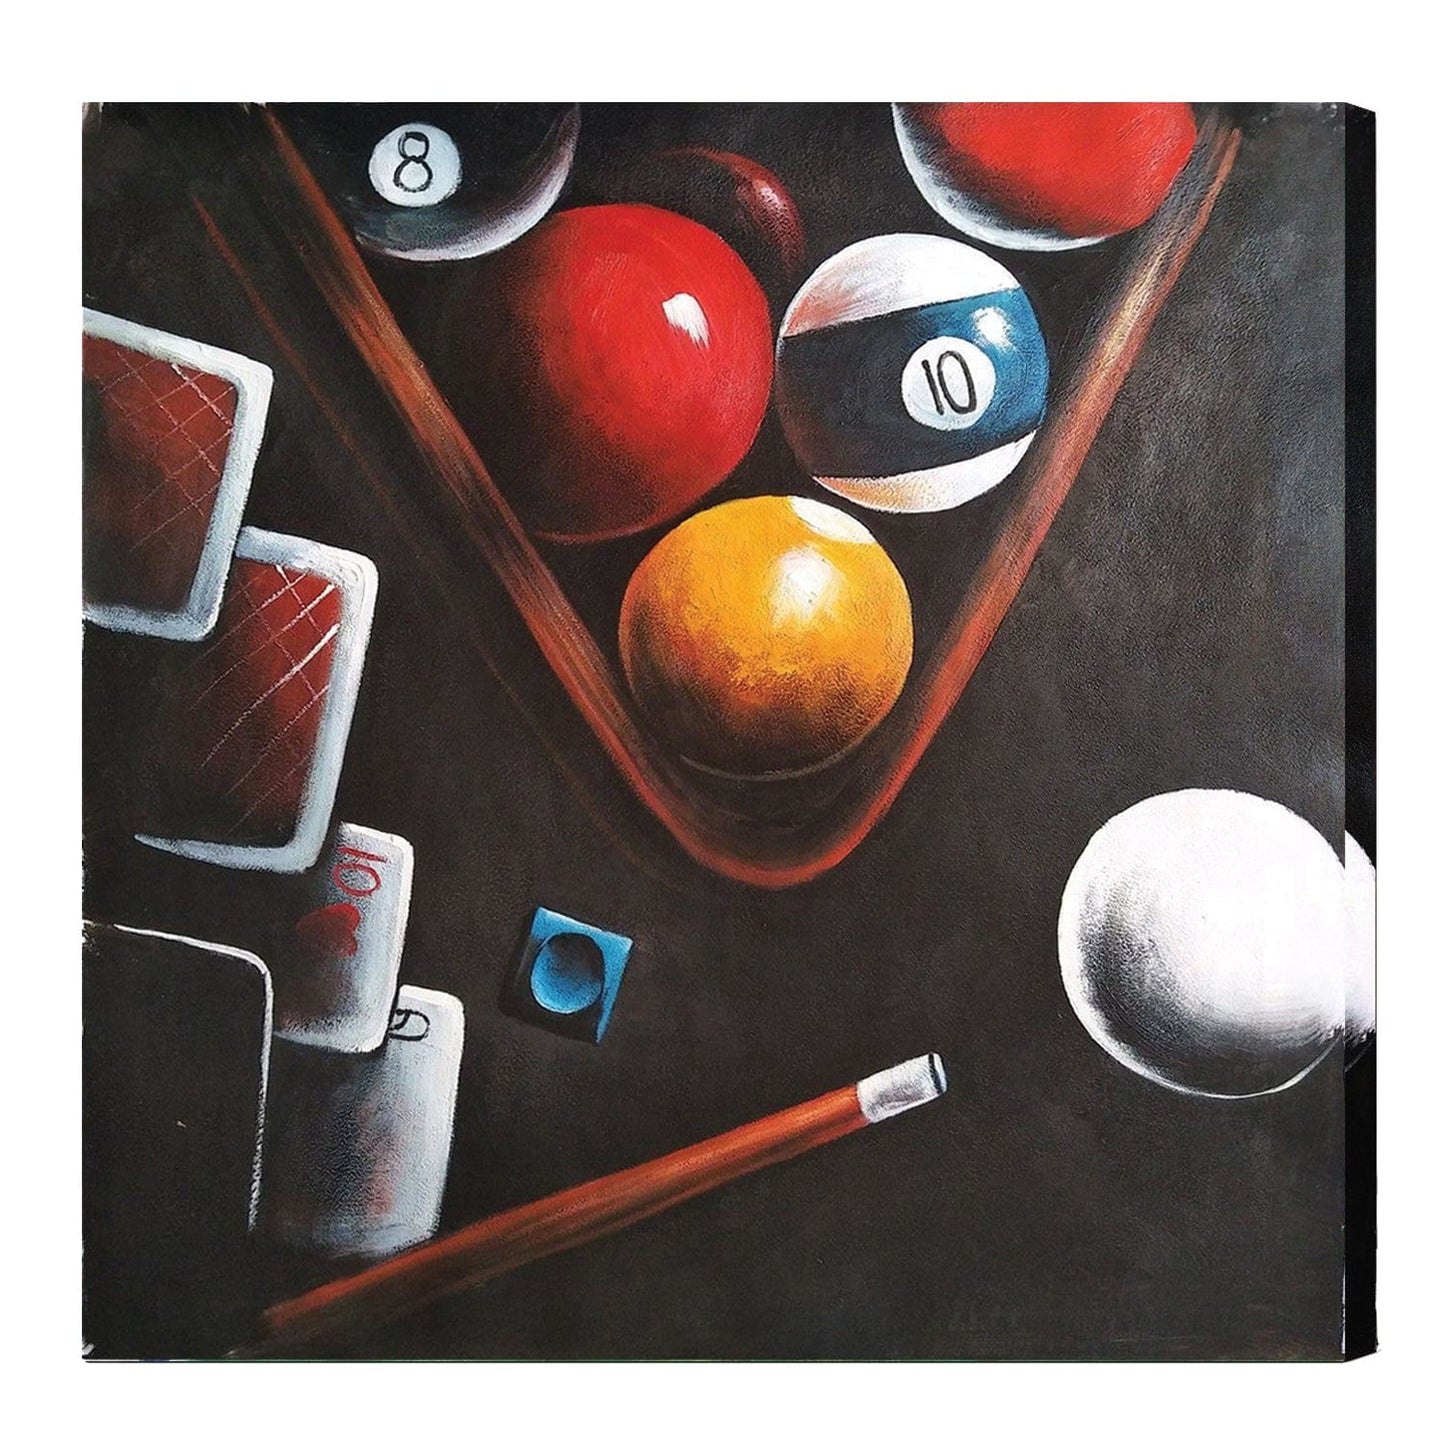 RAM Game Room Ram Game Room Oil Painting On Canvas - Balls In Rack/Cue